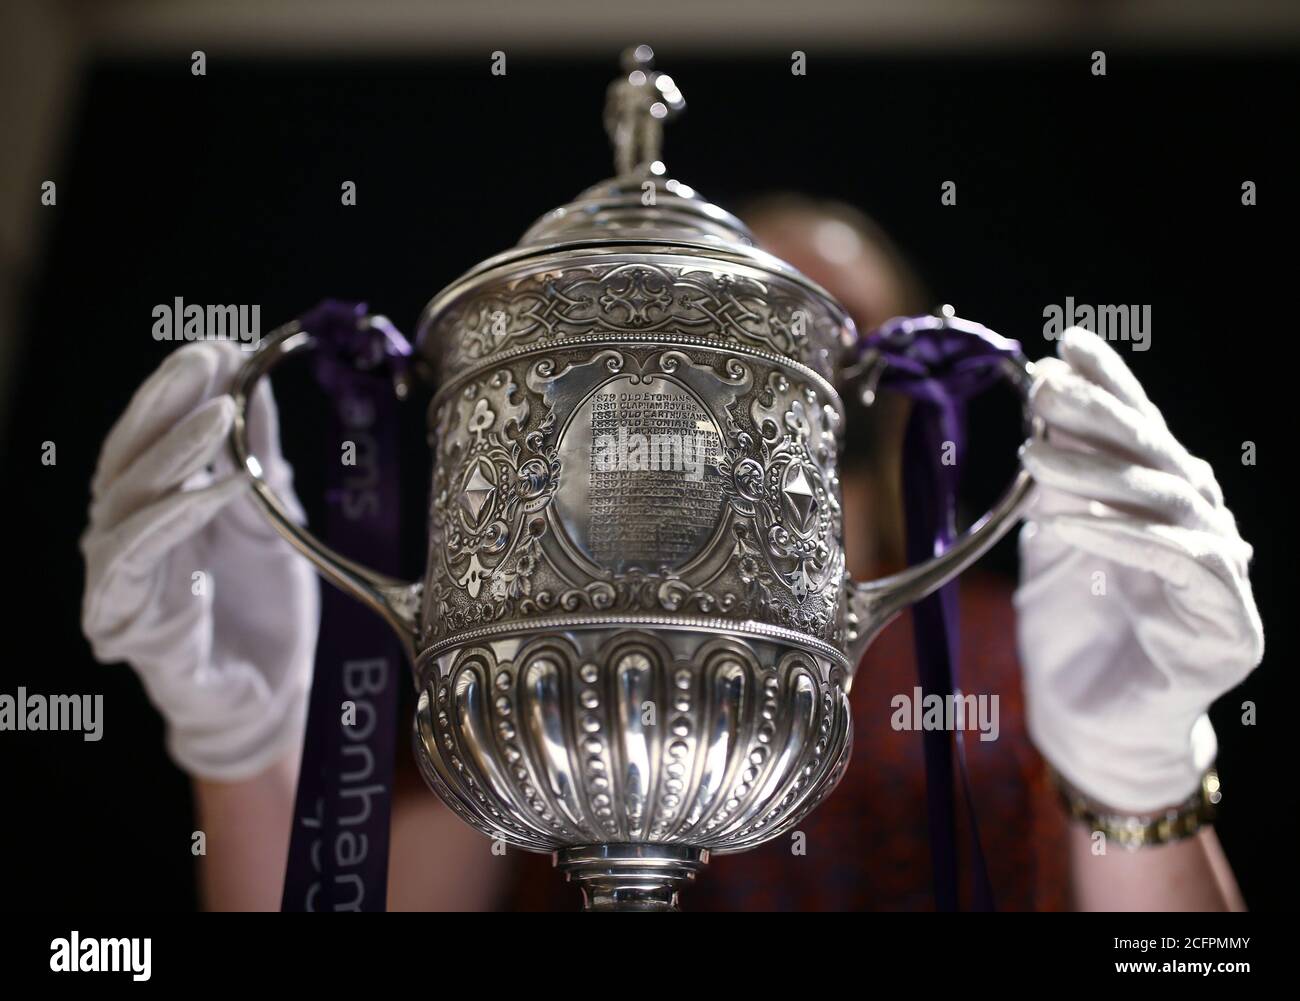 Laurel Kemp of Bonhams with the oldest surviving FA Cup trophy during a preview of the sporting Trophies Sale at which will take place as Bonhams New Bond Street saleroom on September 29. The silver two-handled cup, estimated at GBP 700,000 -900,000, was made by Vaughton and Sons of Birmingham in 1896, and was presented to the FA Cup winning teams between 1896 and 1910, including Manchester United, Manchester City, Everton, Newcastle United and Tottenham Hotspur. Stock Photo